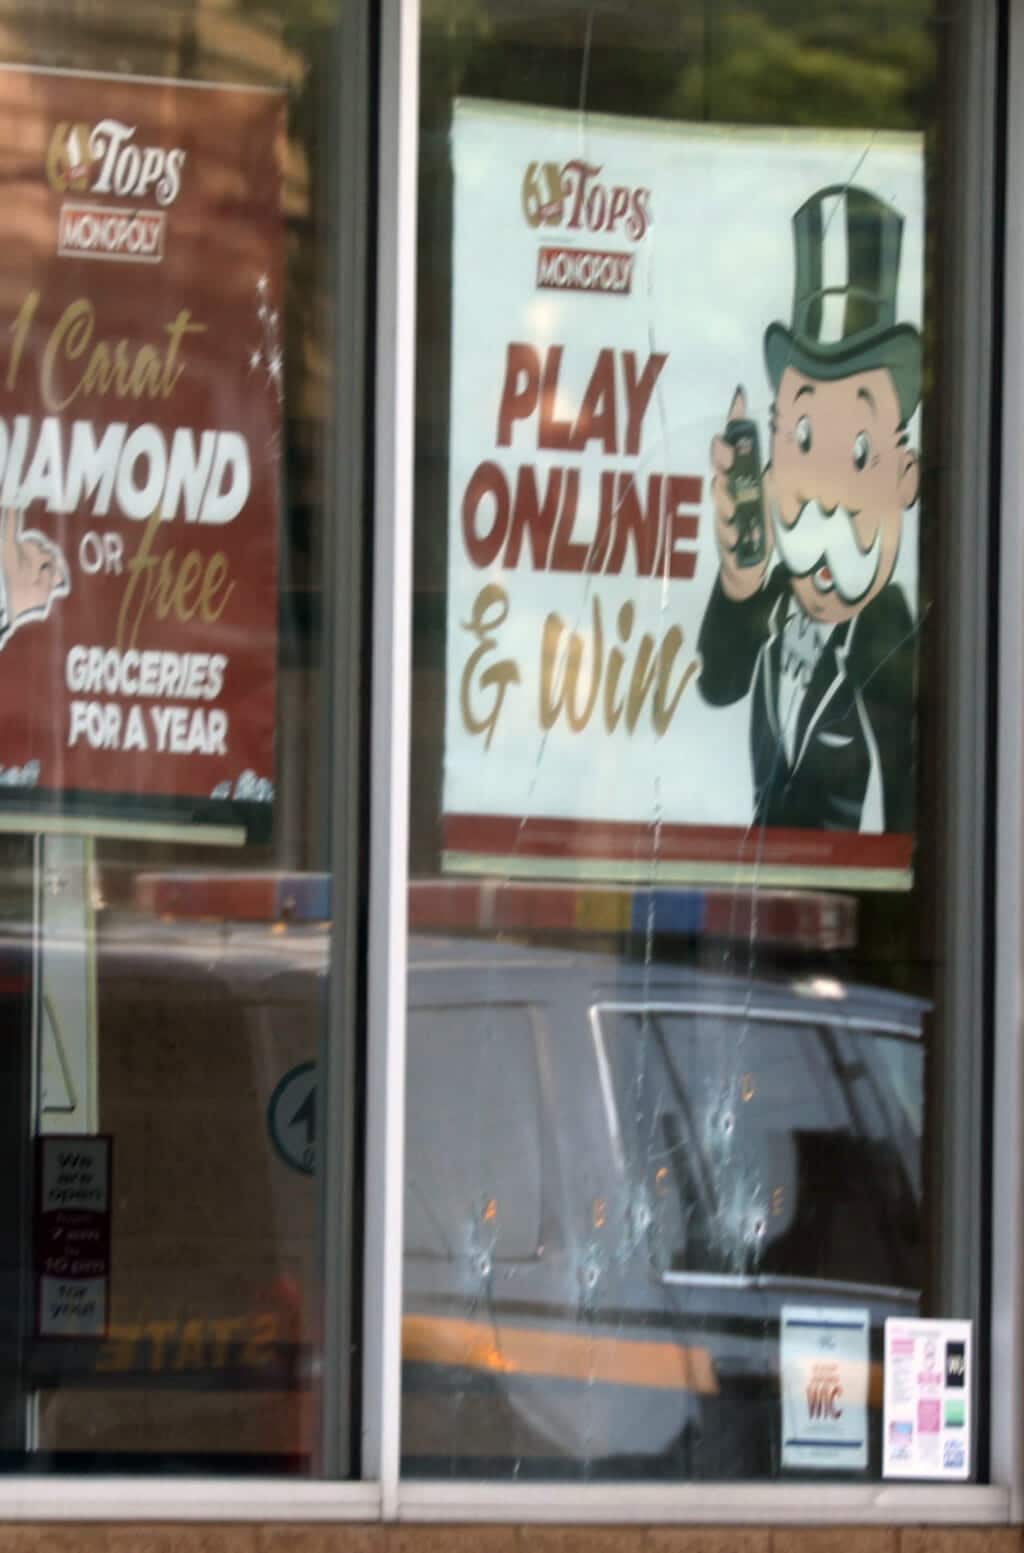 May 15, 2022; Buffalo, NY, USA; Five bullet holes can be seen in the lower part of the window below the Play Online sign at the Tops Friendly Market on Jefferson Ave., in Buffalo, NY on May 15, 2022. 10 people were killed and three others injured in a shooting at the Buffalo grocery store on May 14, 2022. Mandatory Credit: Tina MacIntyre-Yee-USA TODAY NETWORK